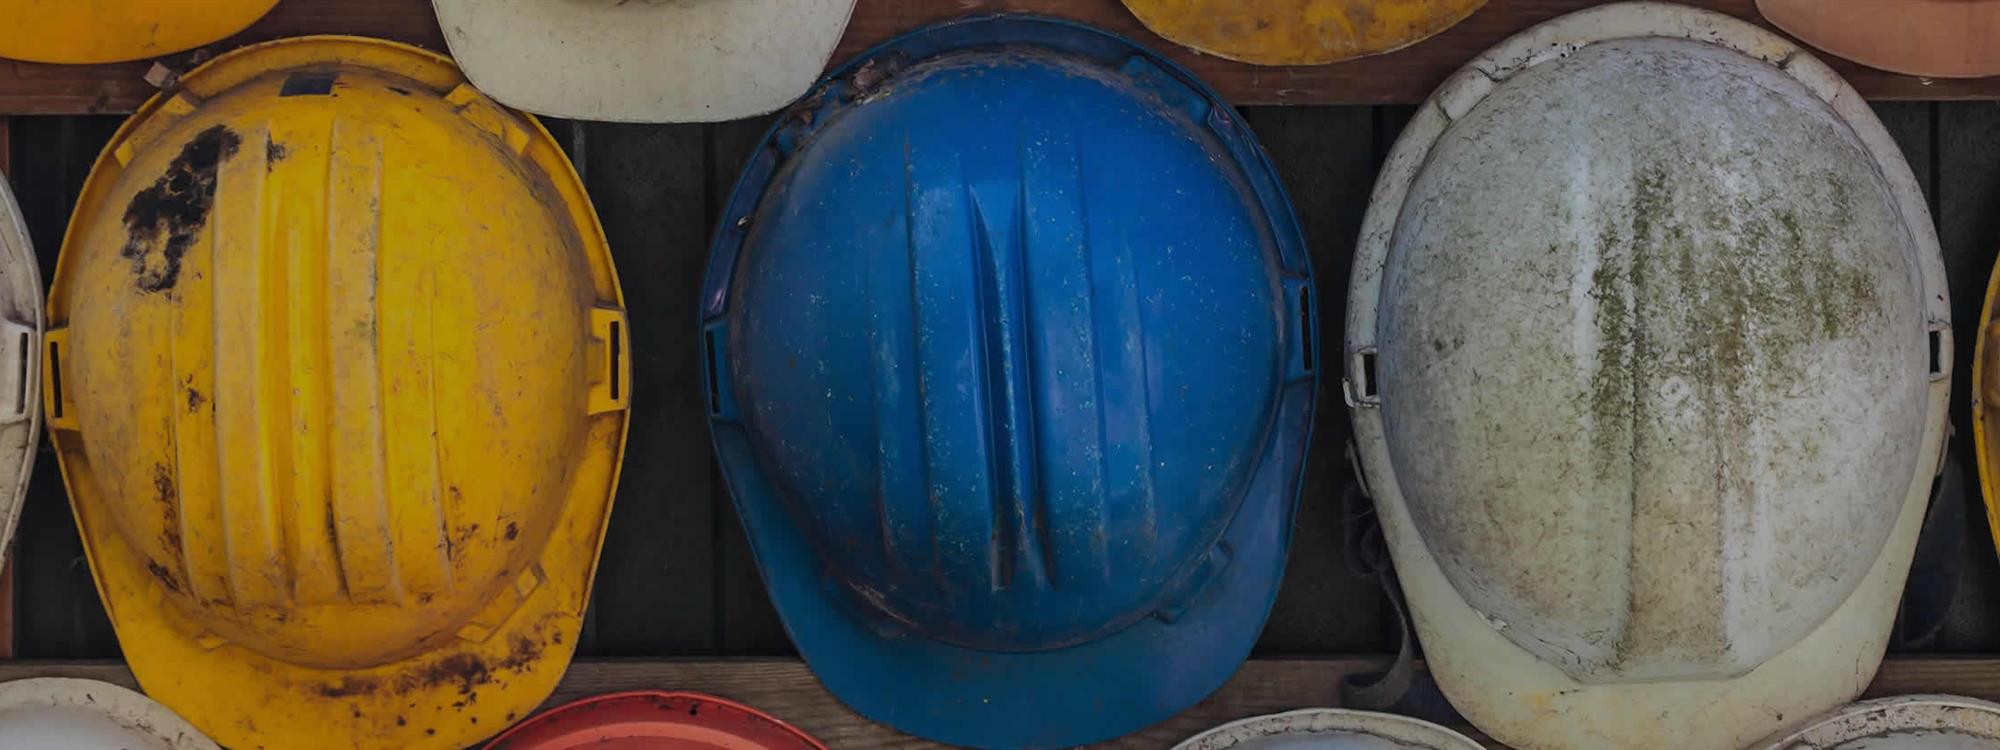 multiple hard hats next to each other